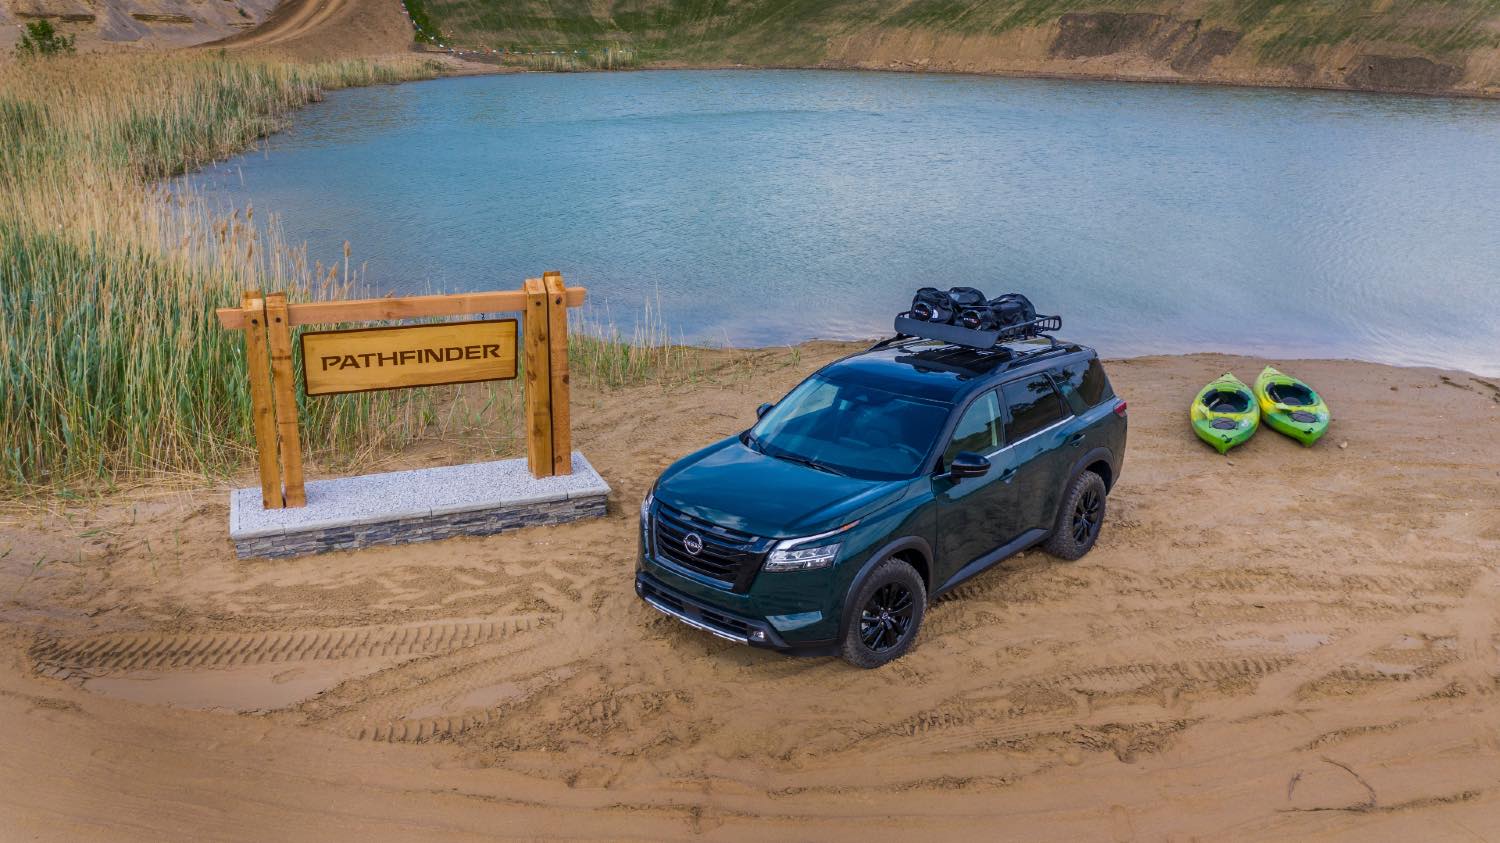 A 2023 Nissan Pathfinder on display by a lake.